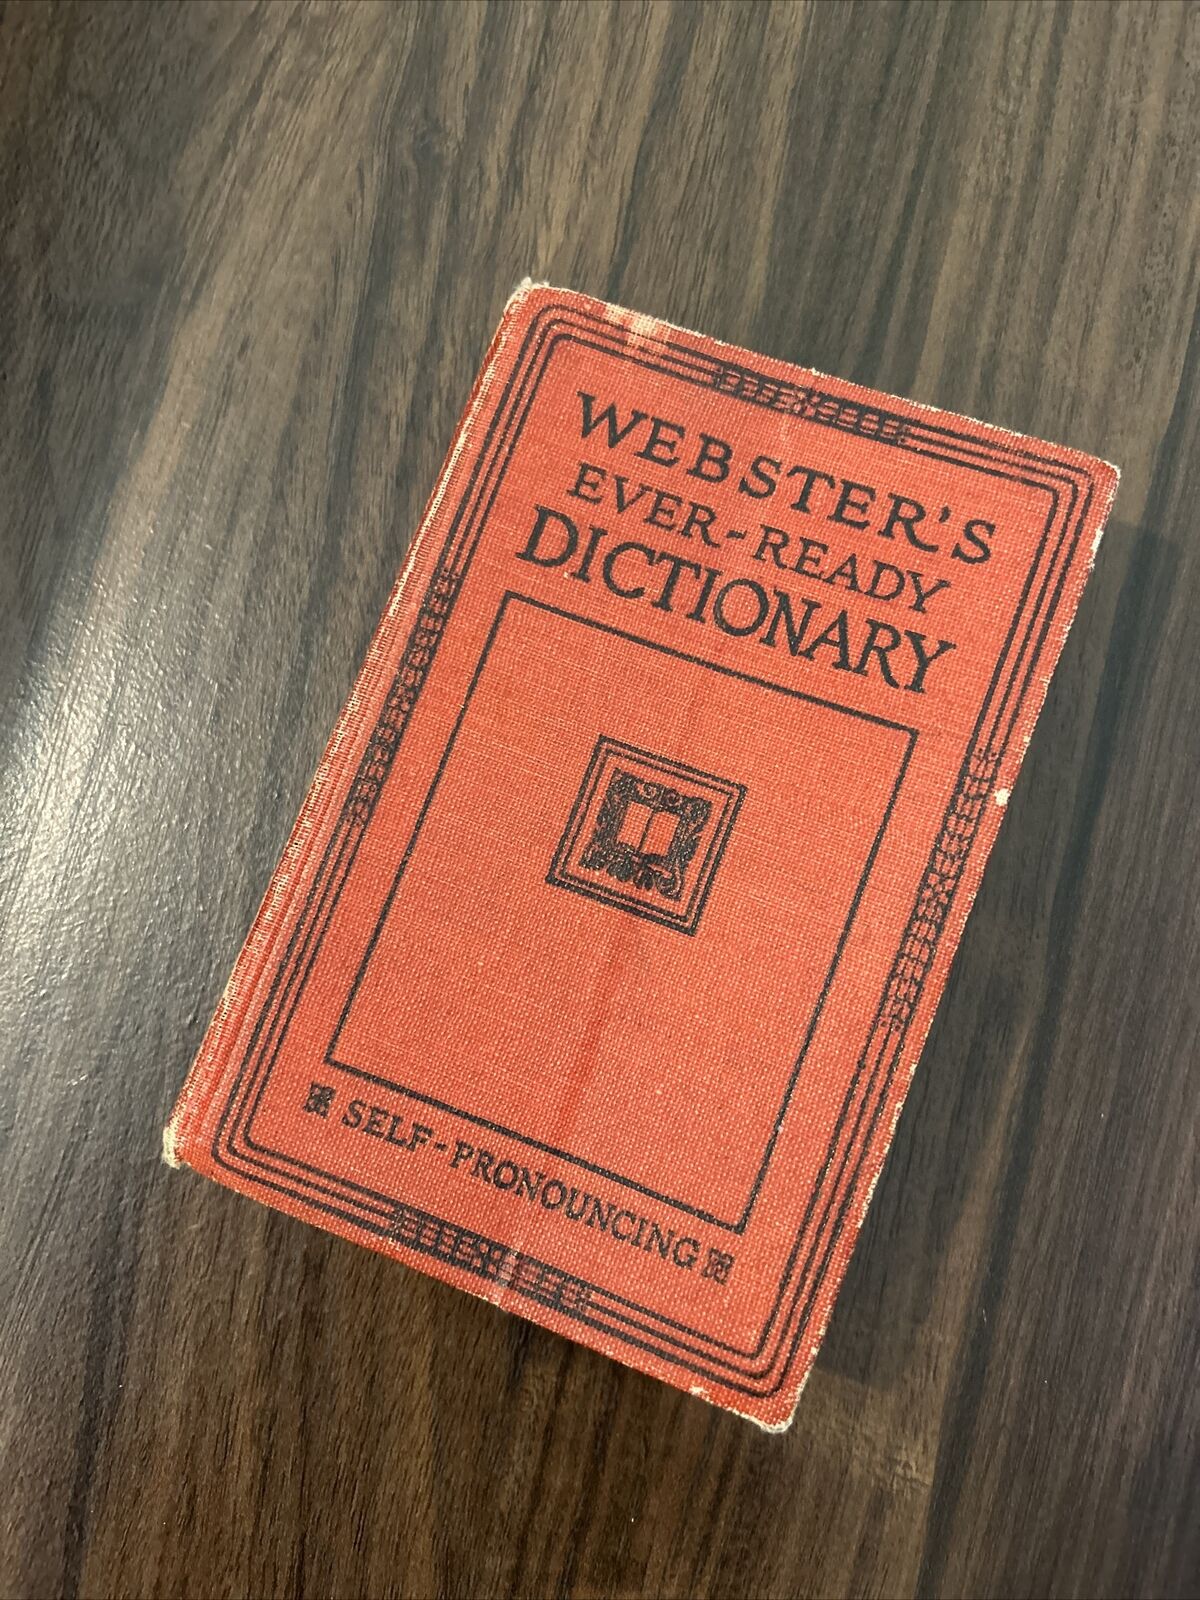 Vintage 1924 Webster’s Dictionary Ever-Ready ~ J. H. Sears Vintage 100 Year Old